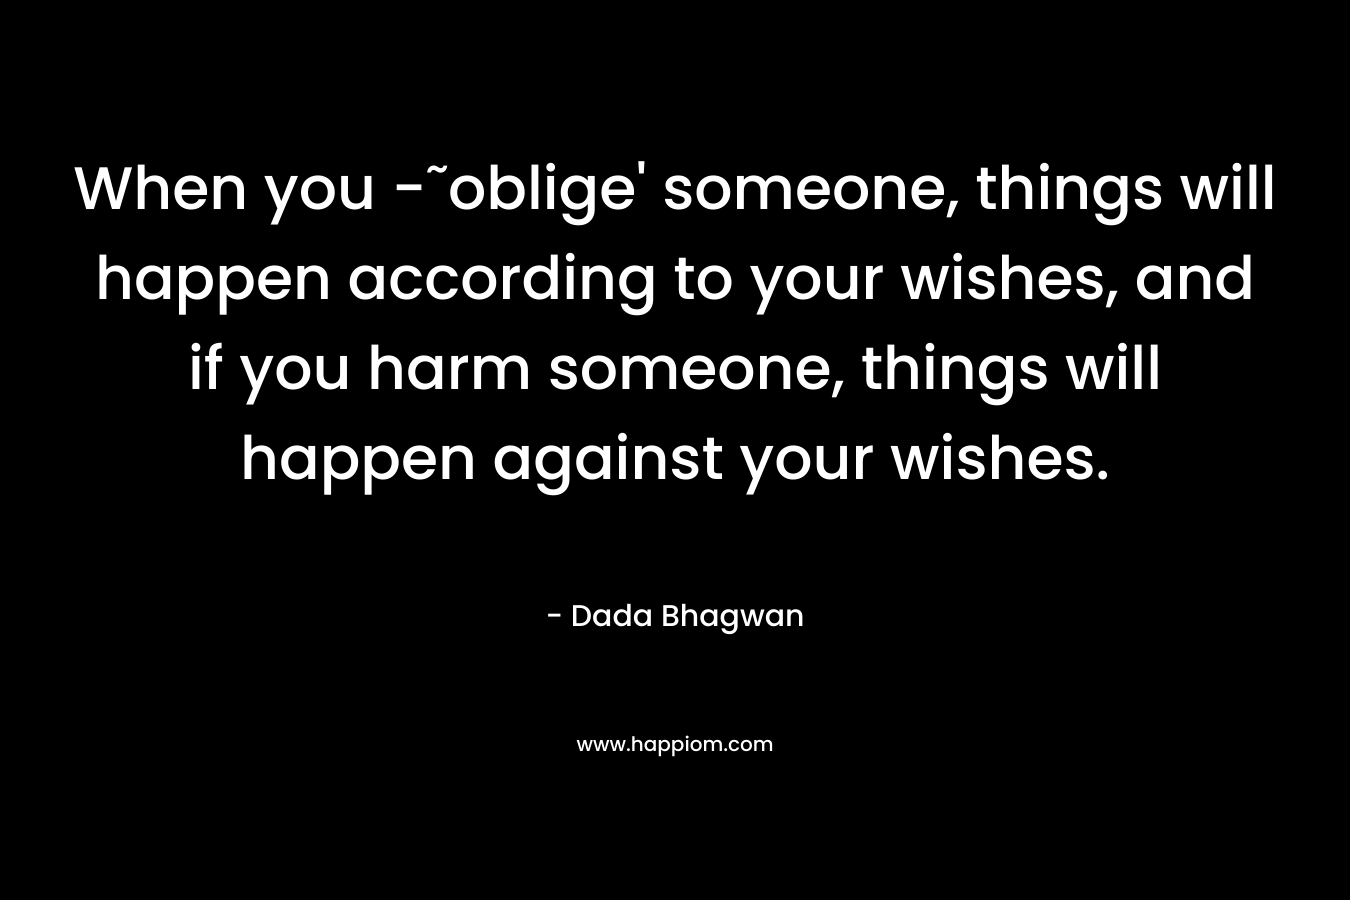 When you -˜oblige’ someone, things will happen according to your wishes, and if you harm someone, things will happen against your wishes. – Dada Bhagwan